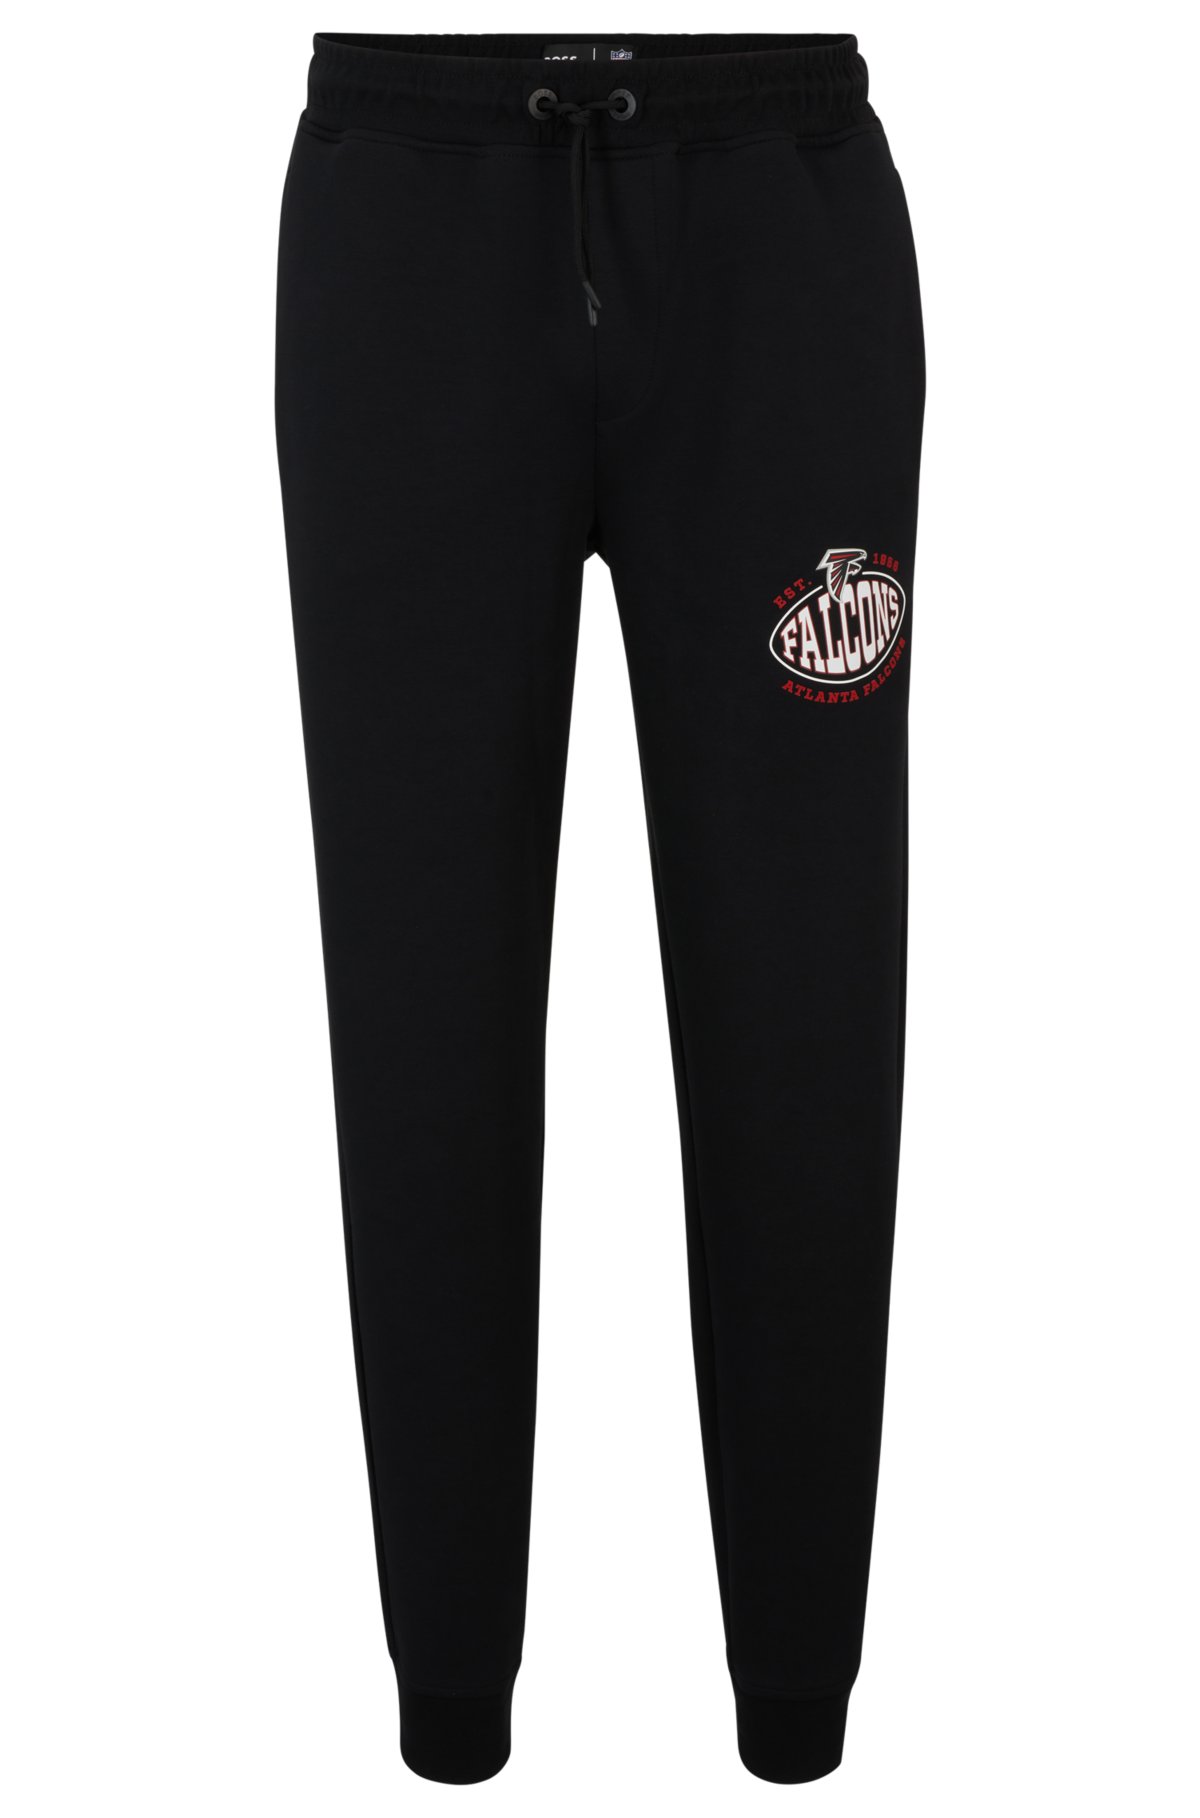 BOSS x NFL cotton-blend tracksuit bottoms with collaborative branding, Falcons